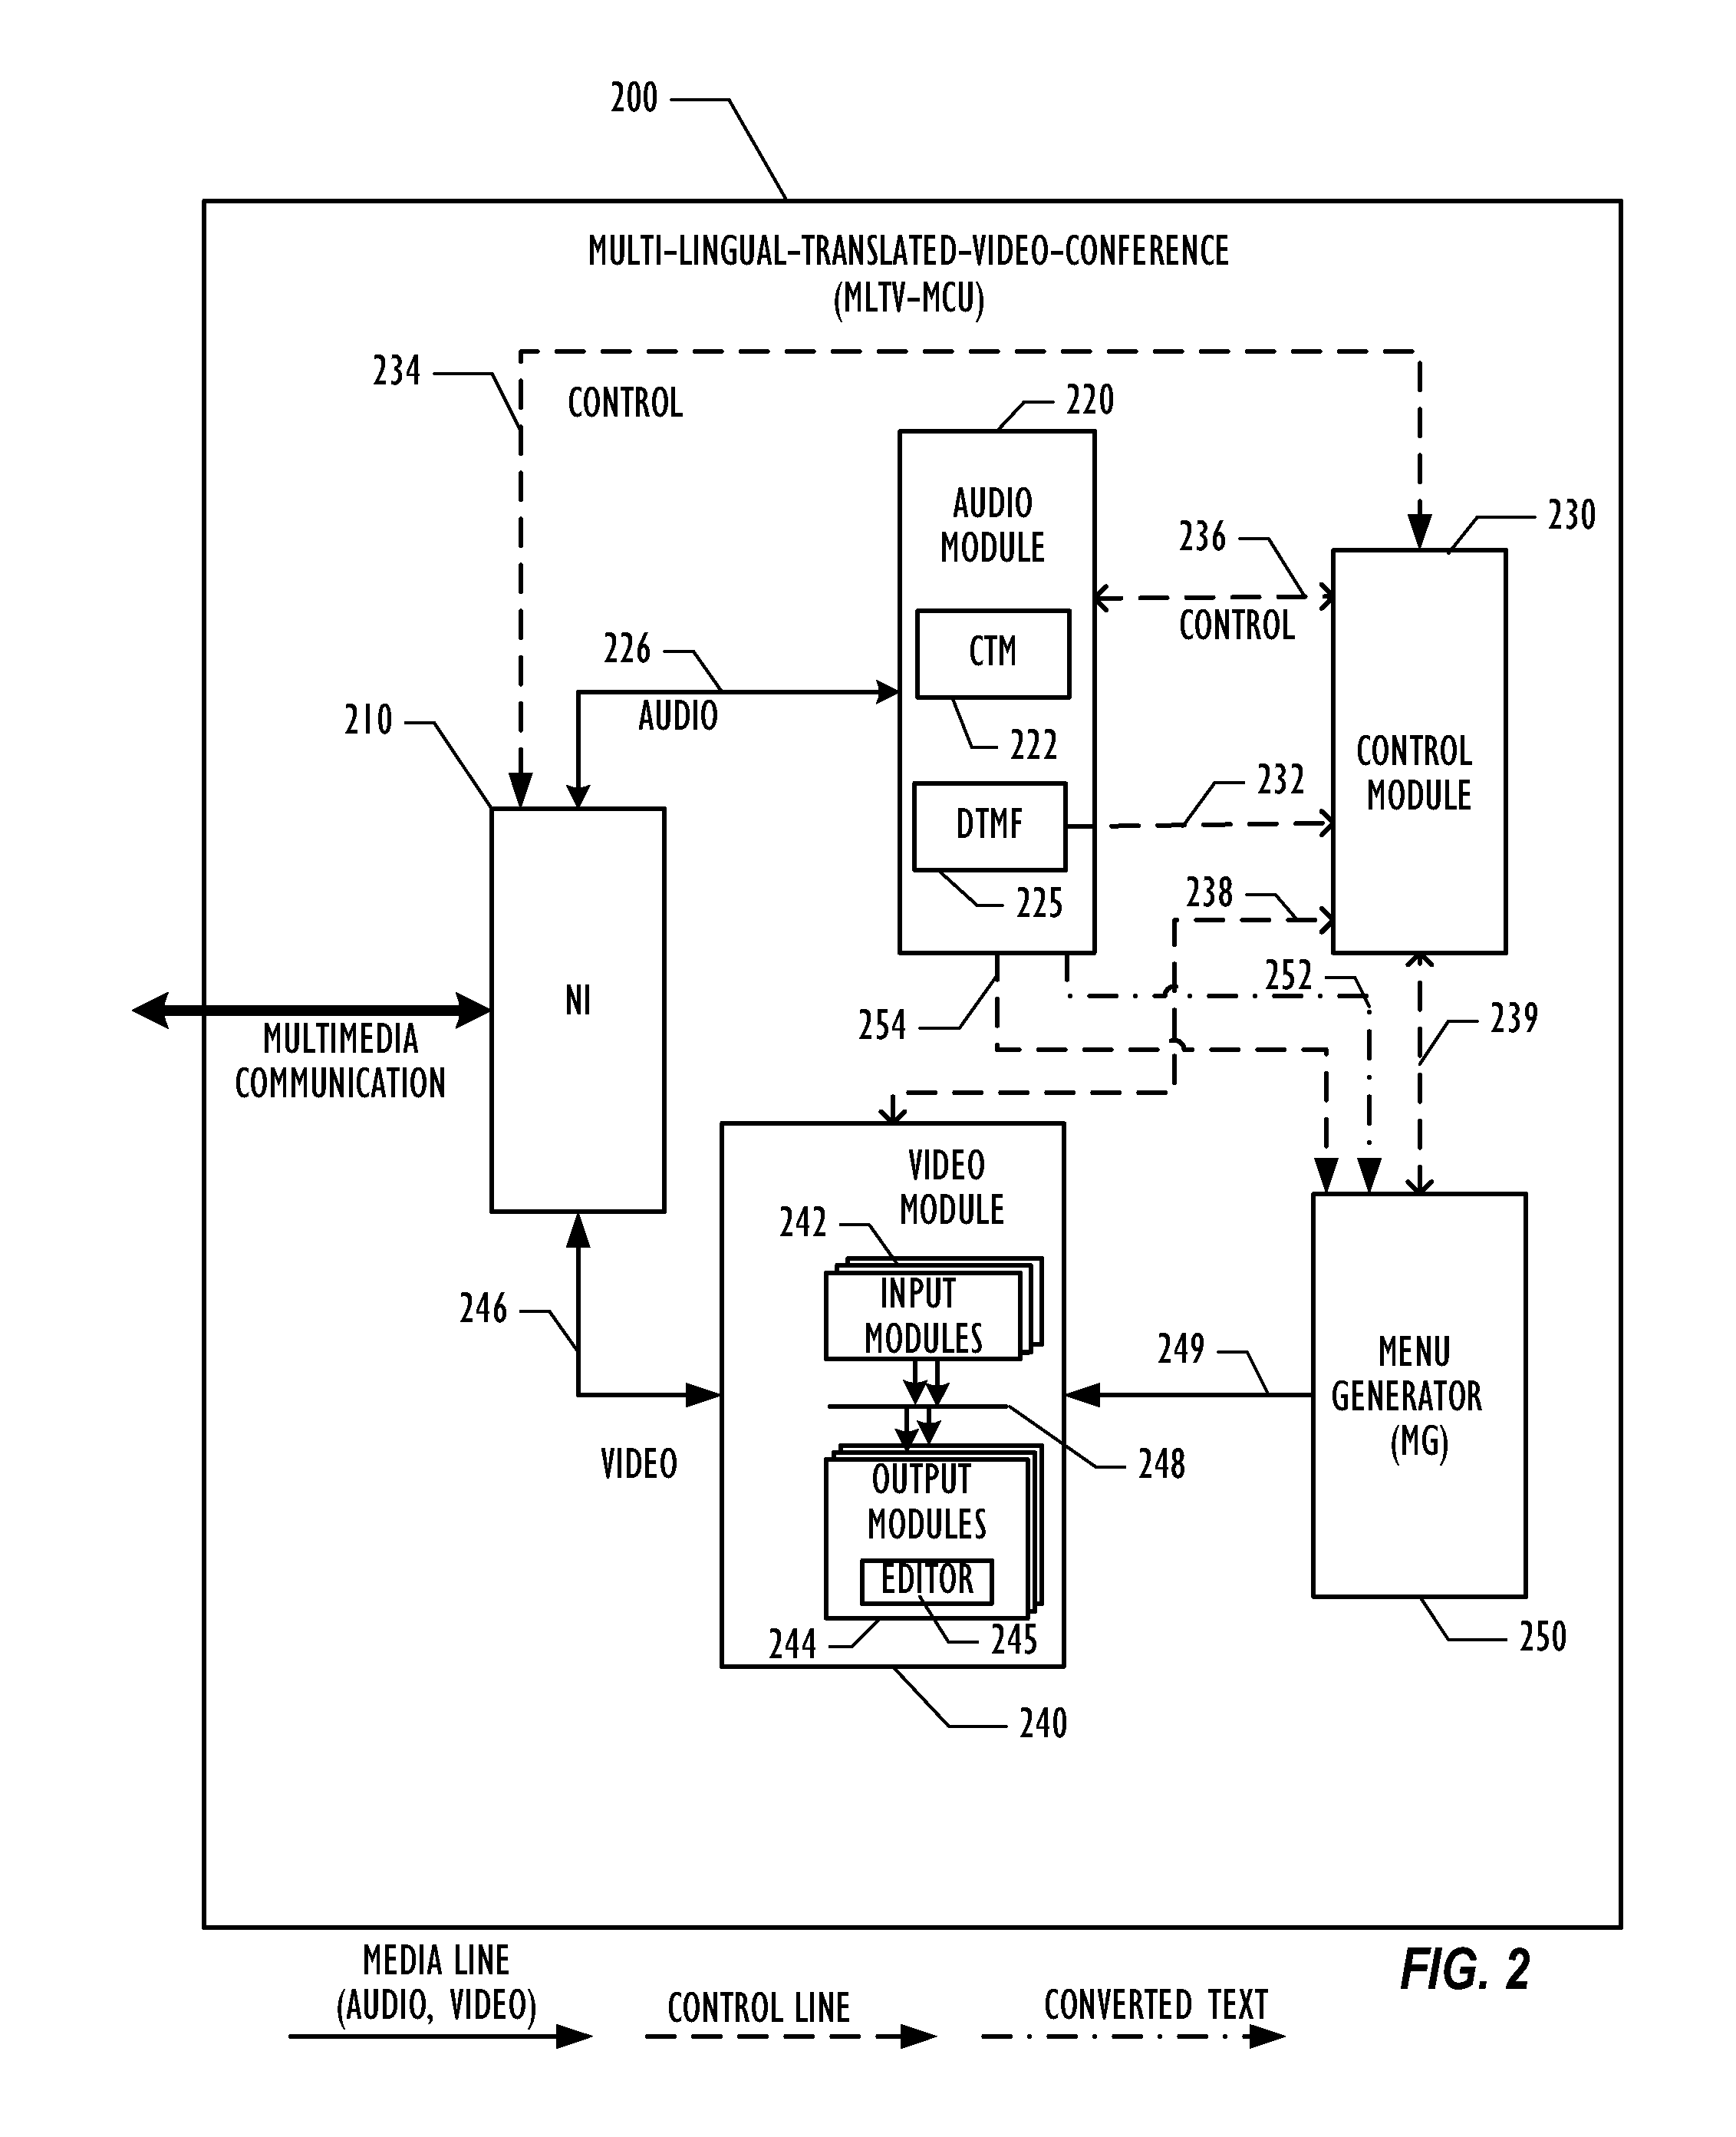 Method and System for Adding Translation in a Videoconference